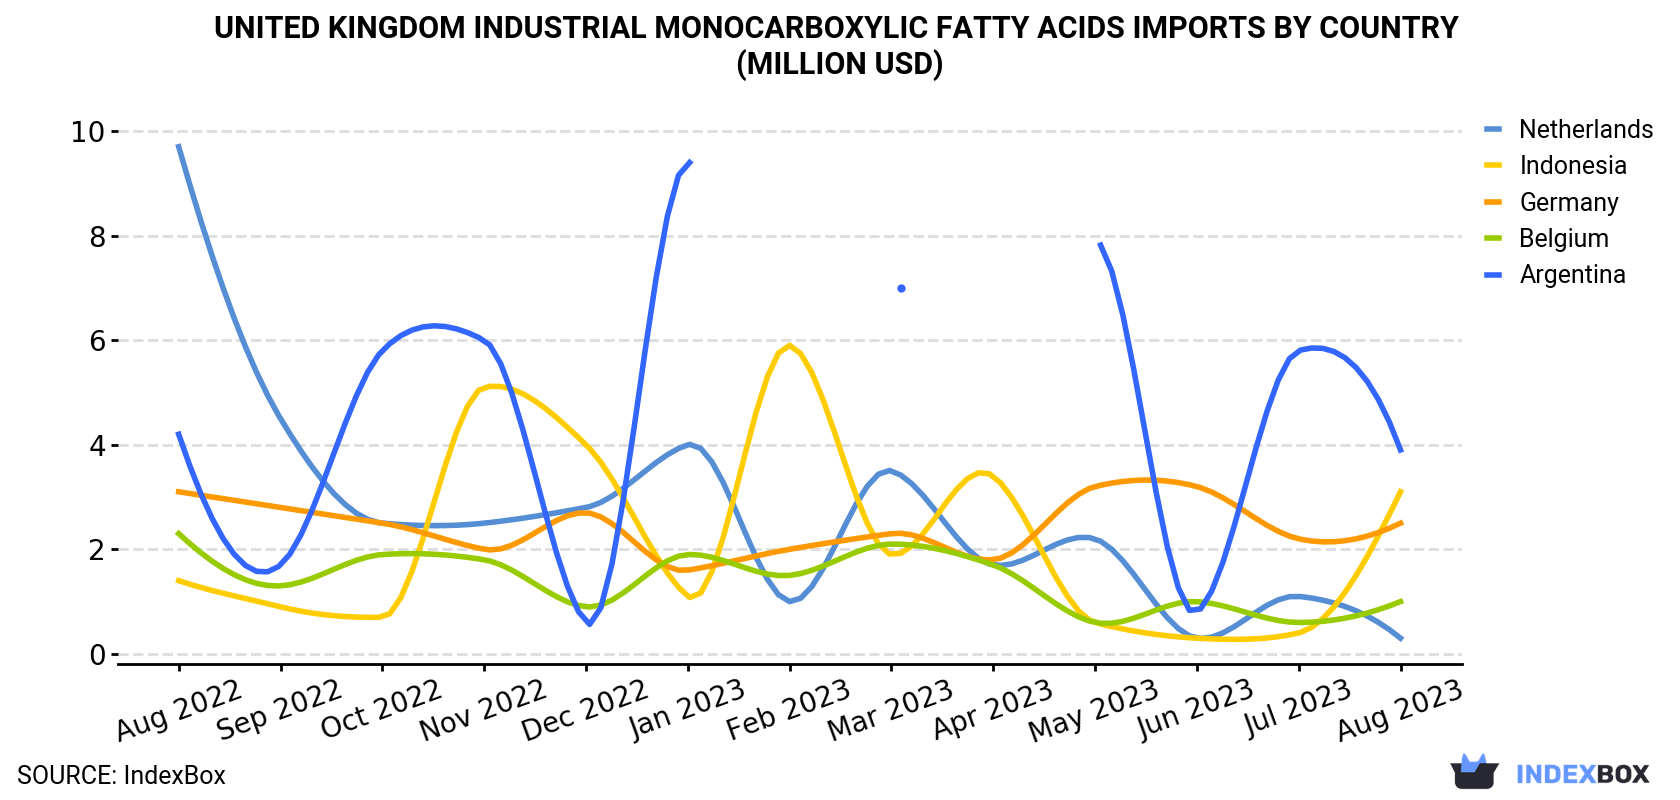 United Kingdom Industrial Monocarboxylic Fatty Acids Imports By Country (Million USD)